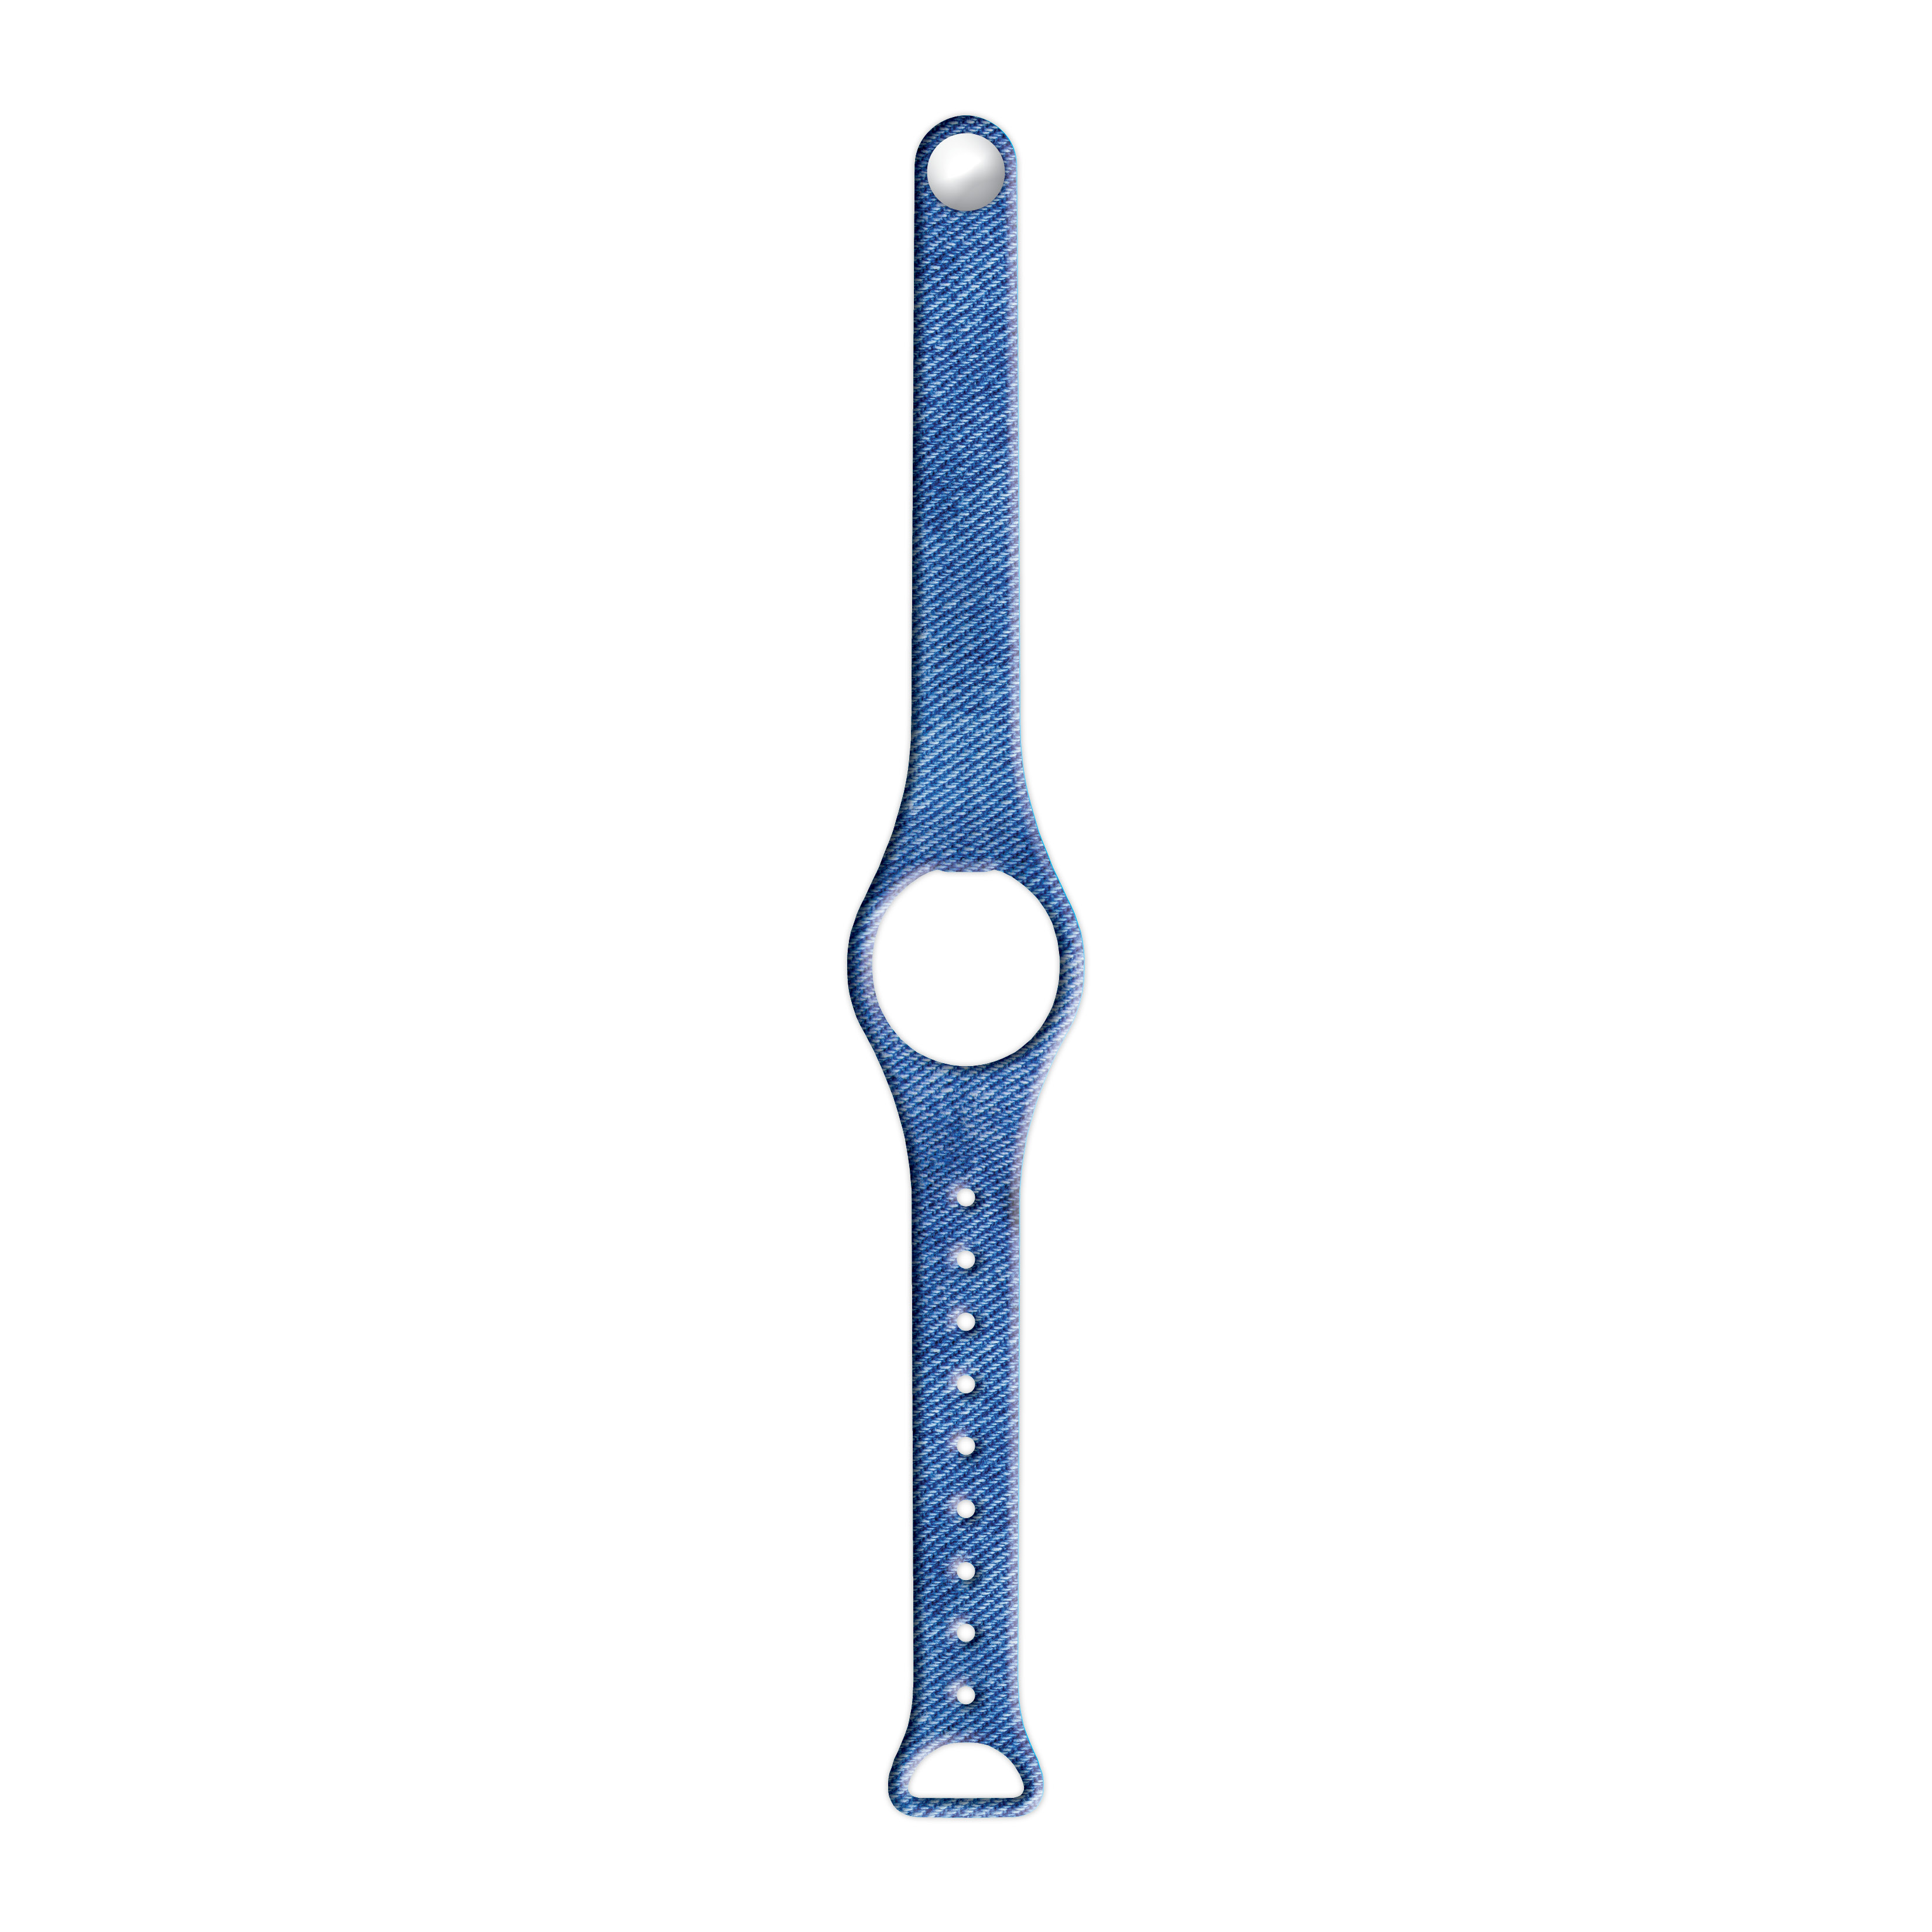 Denim - Watchitude Move 2 | Blip Watch Band (Band Only)